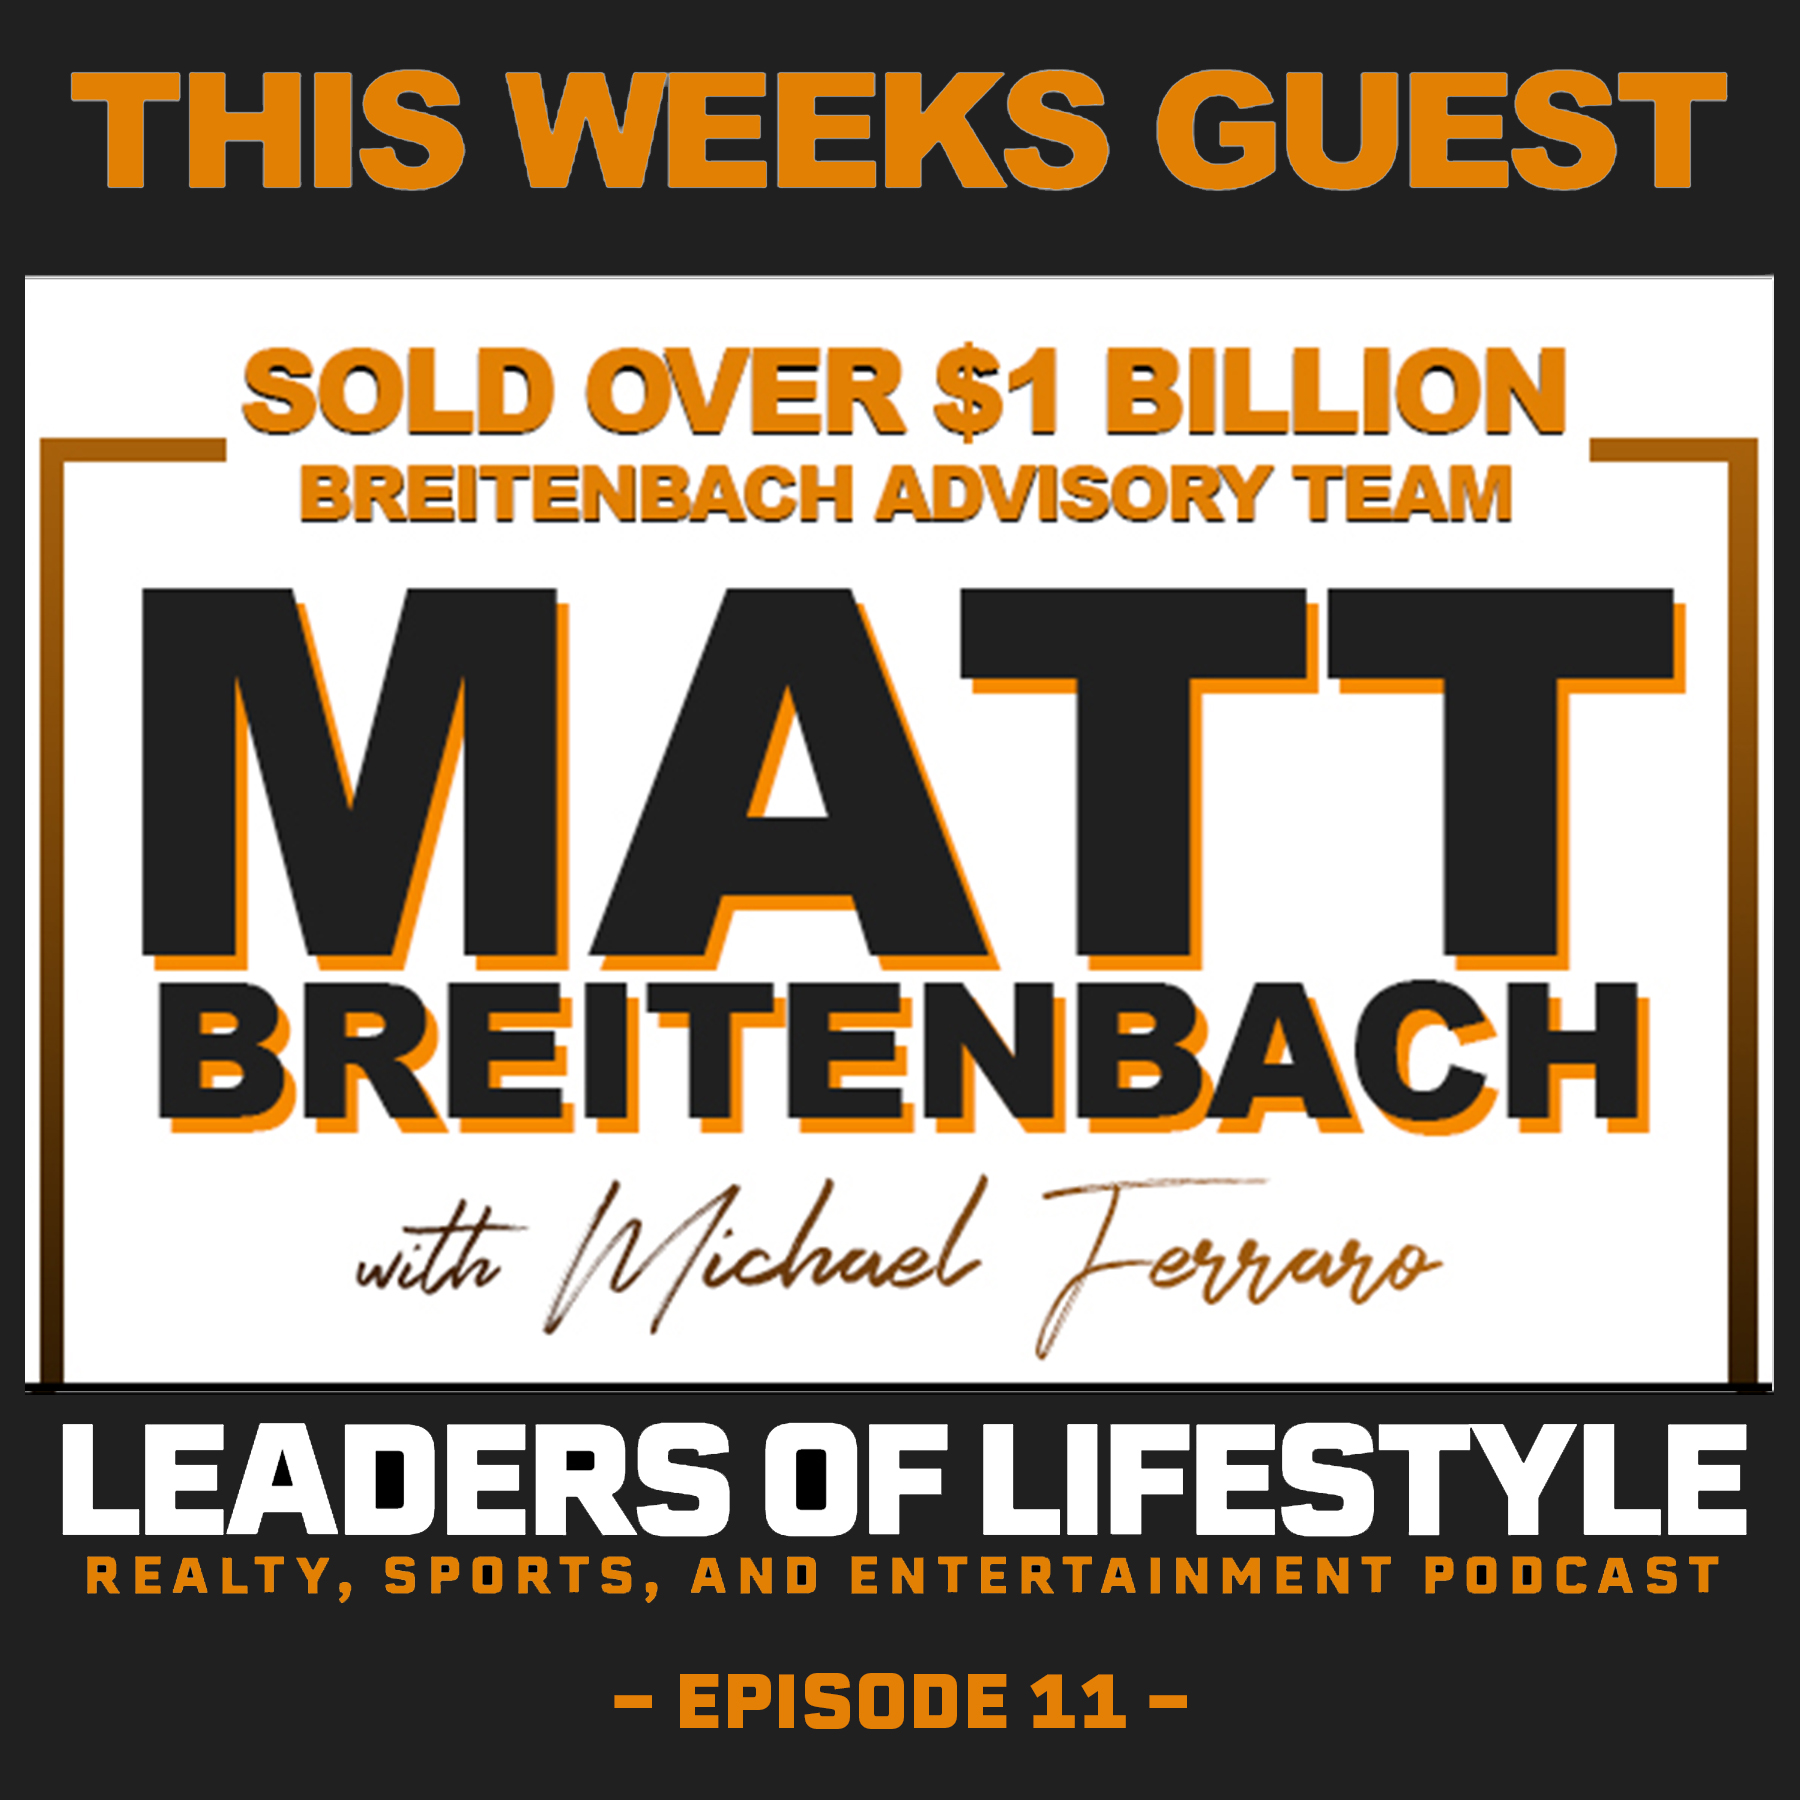 Artwork for podcast Leaders of Lifestyle